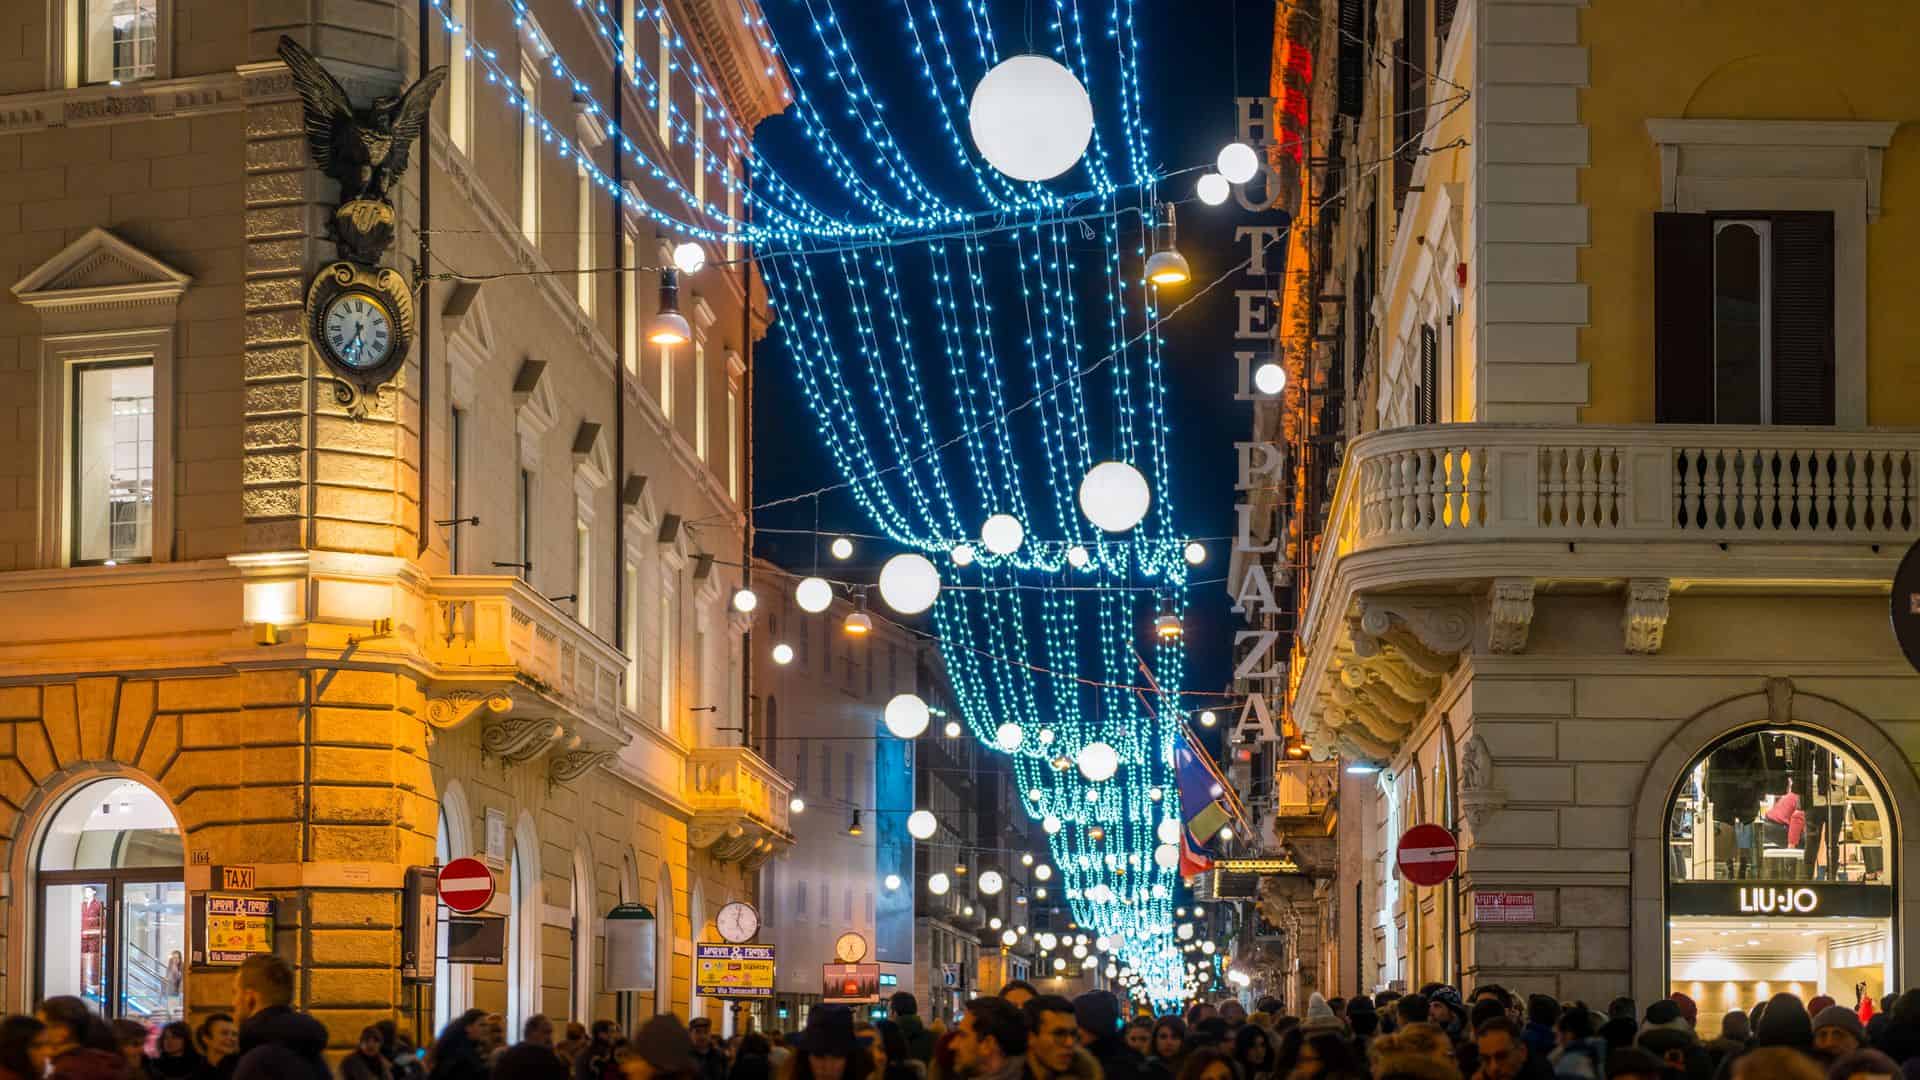 Via del Corso, a busy street in Rome, at Christmastime.